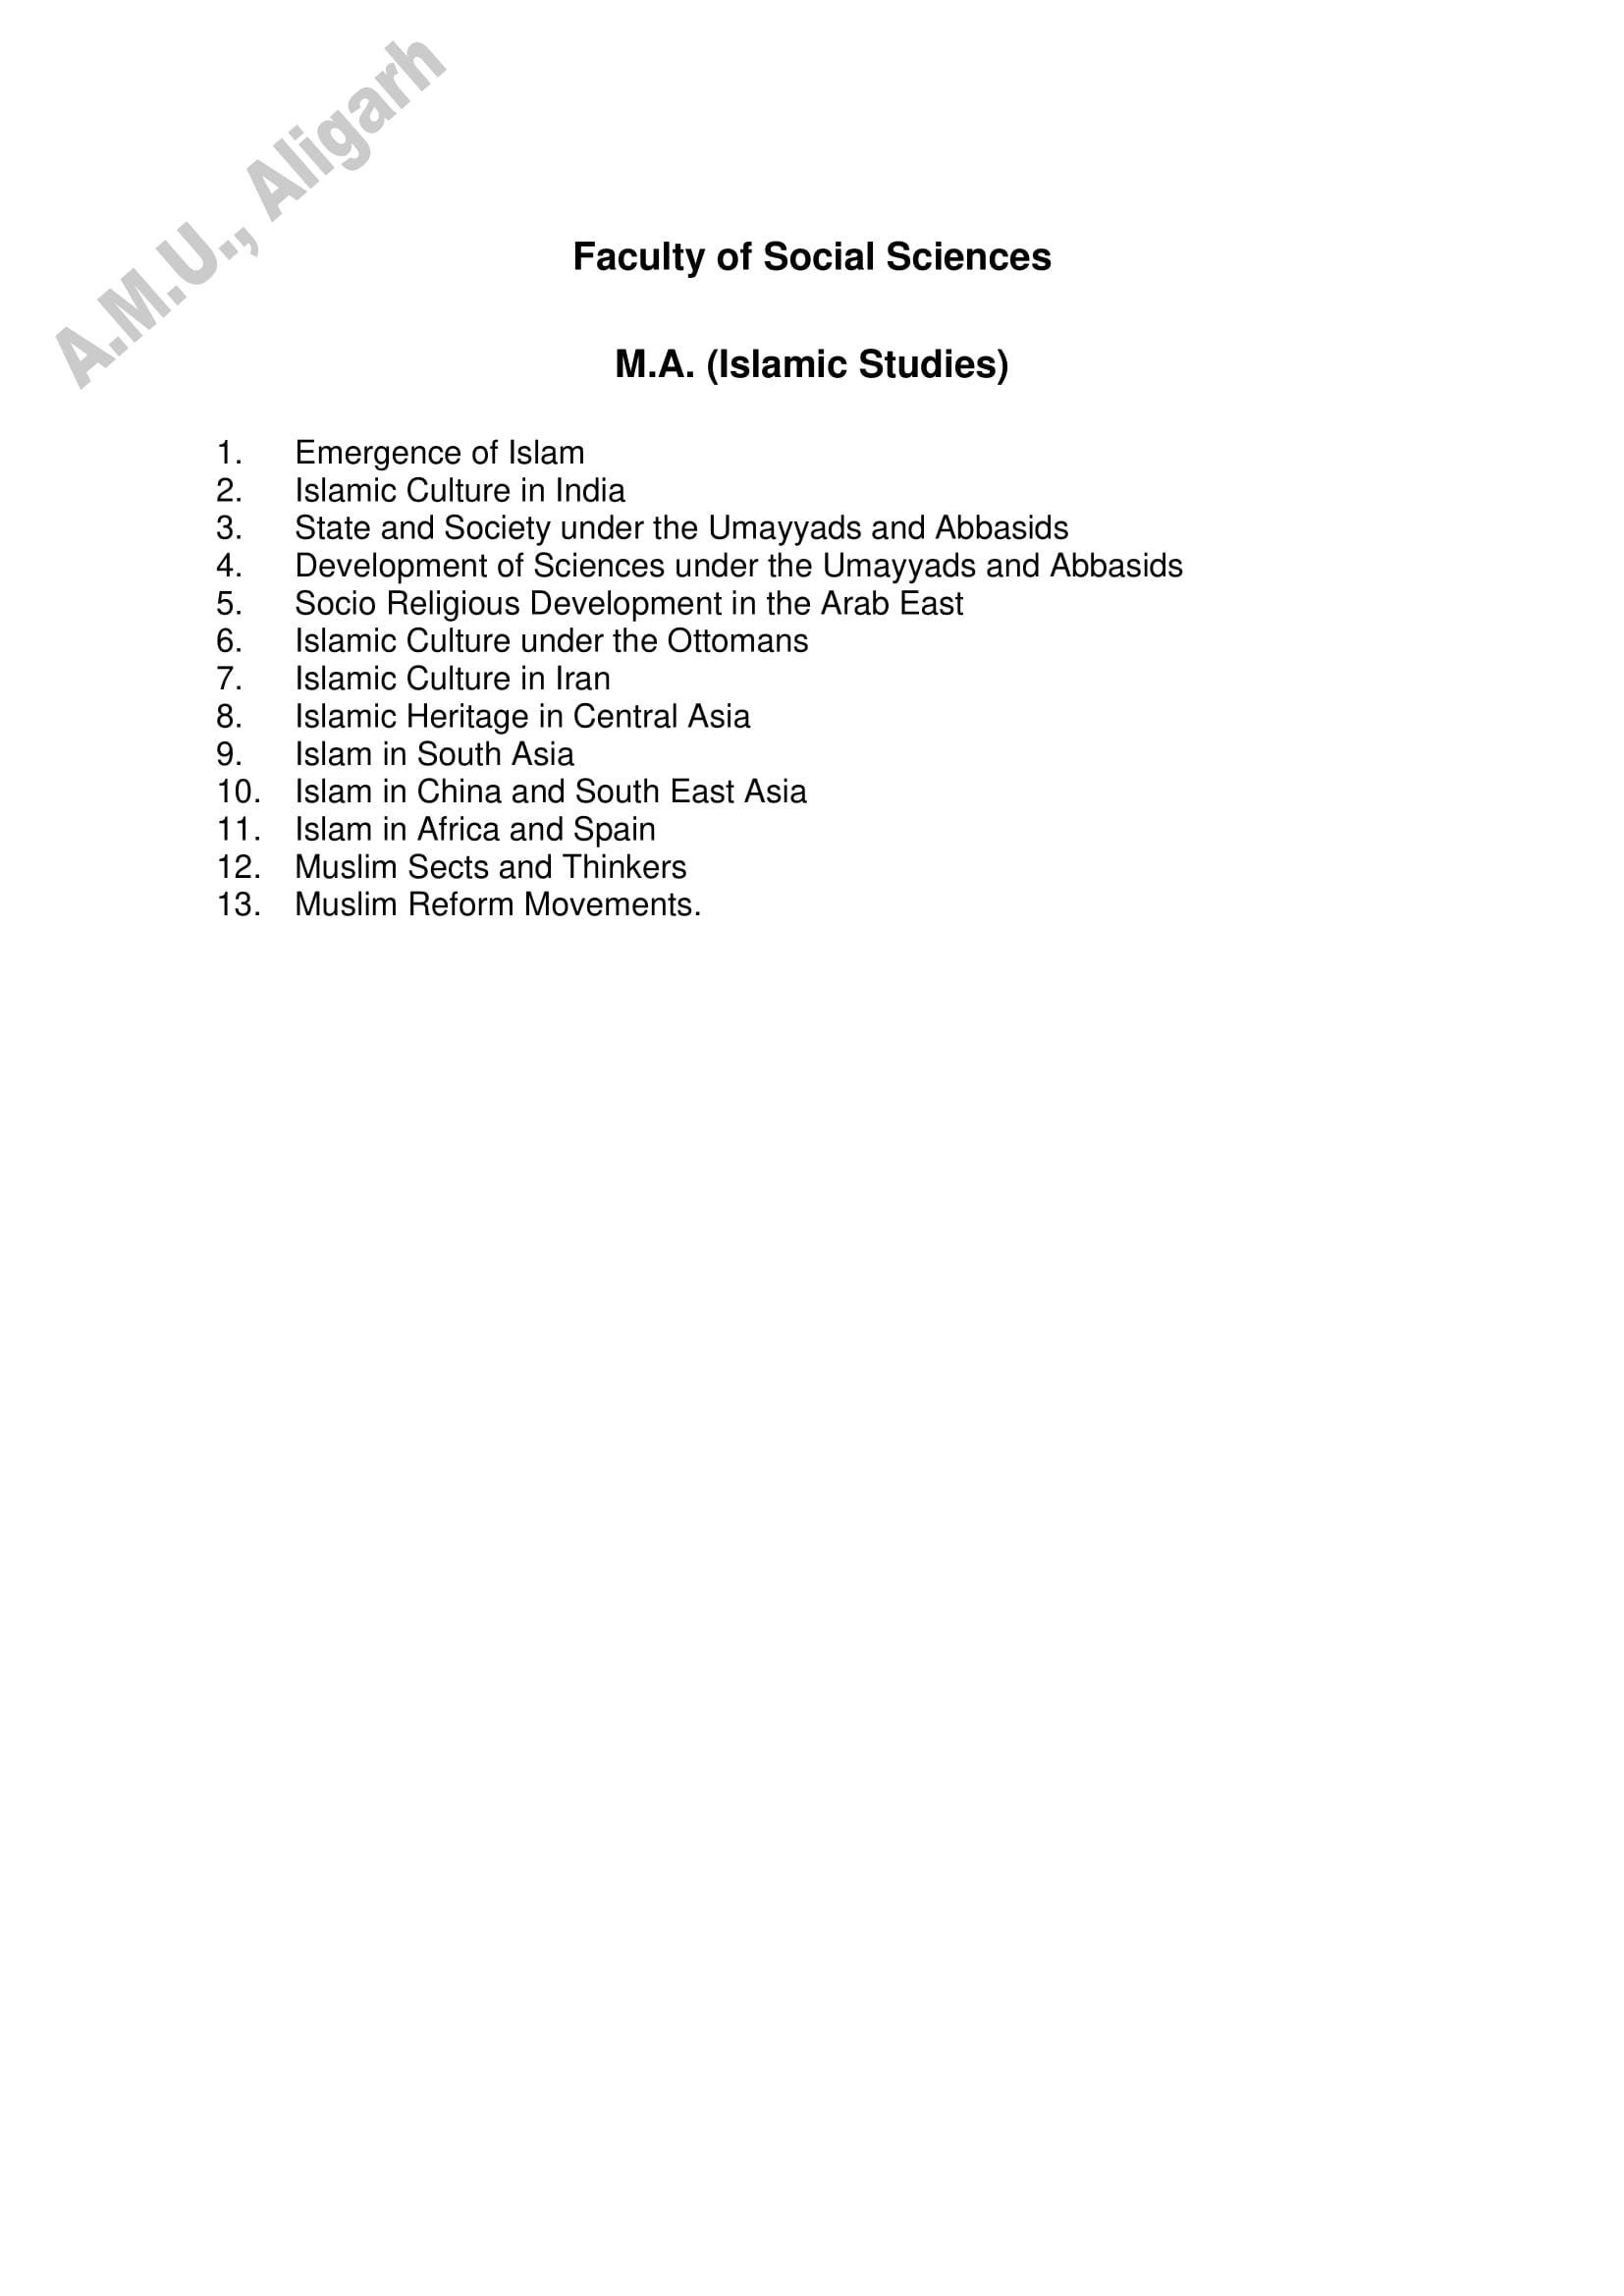 AMU Entrance Exam Syllabus for M.A. in Islamic Studies - Page 1